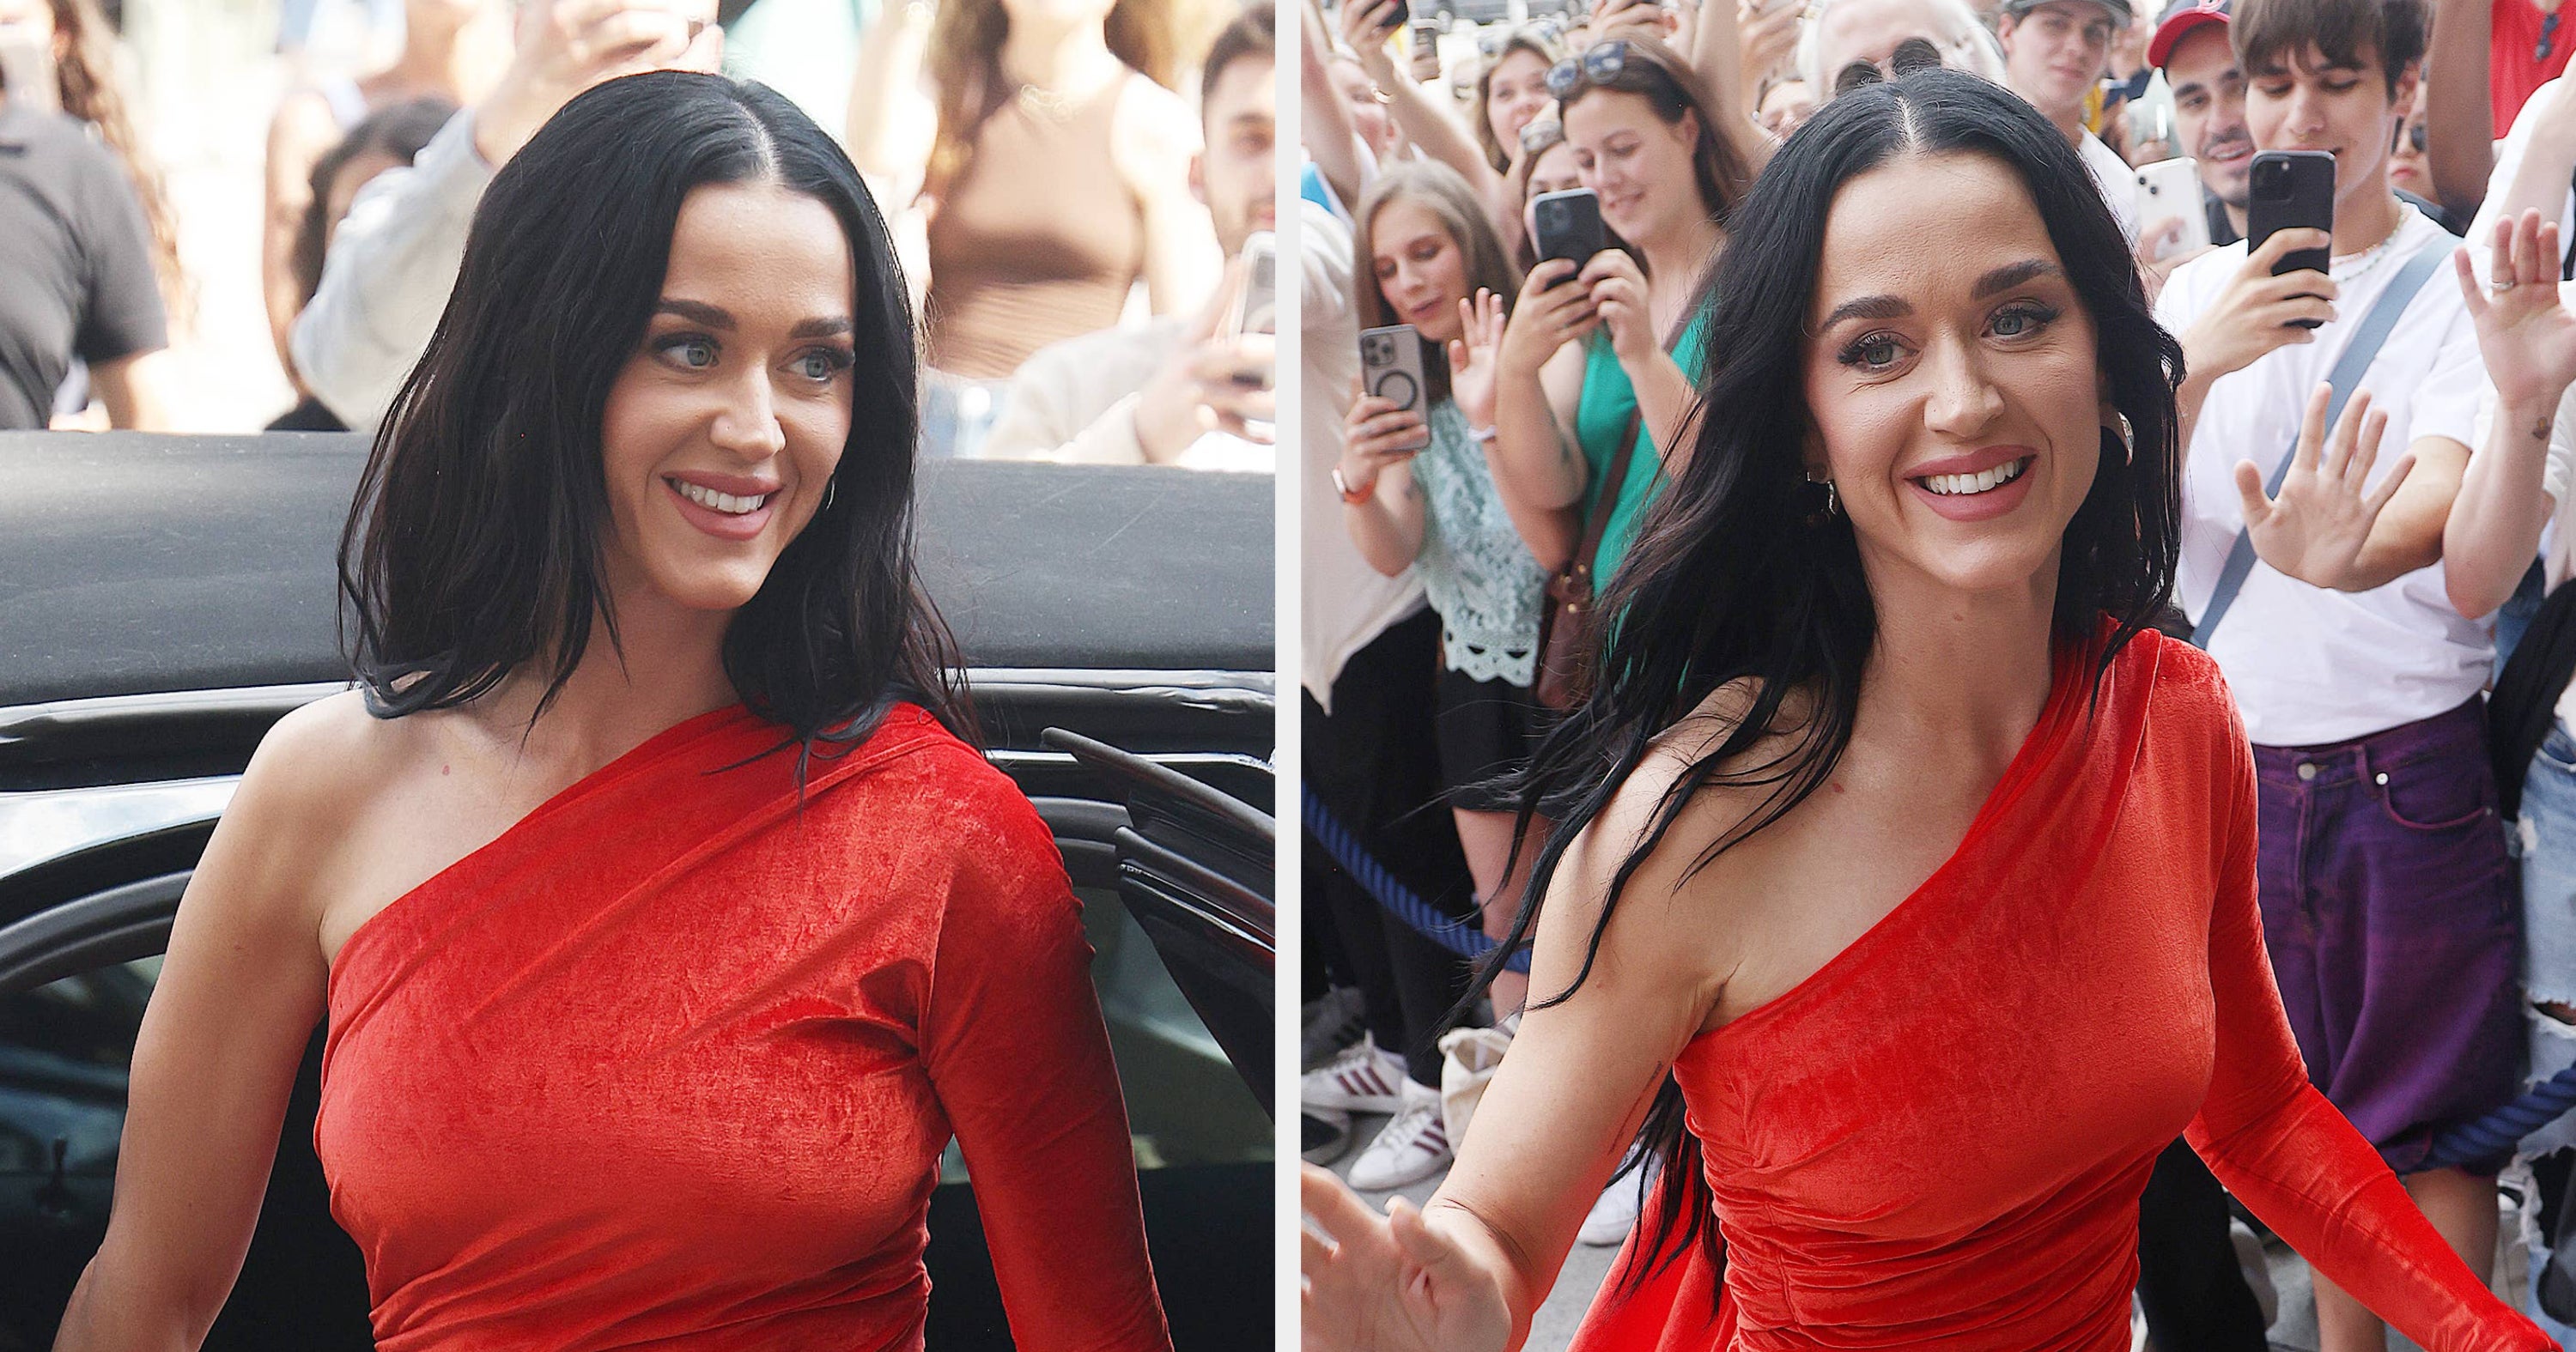 Katy Perry wore a dress with a train more than 100 meters long